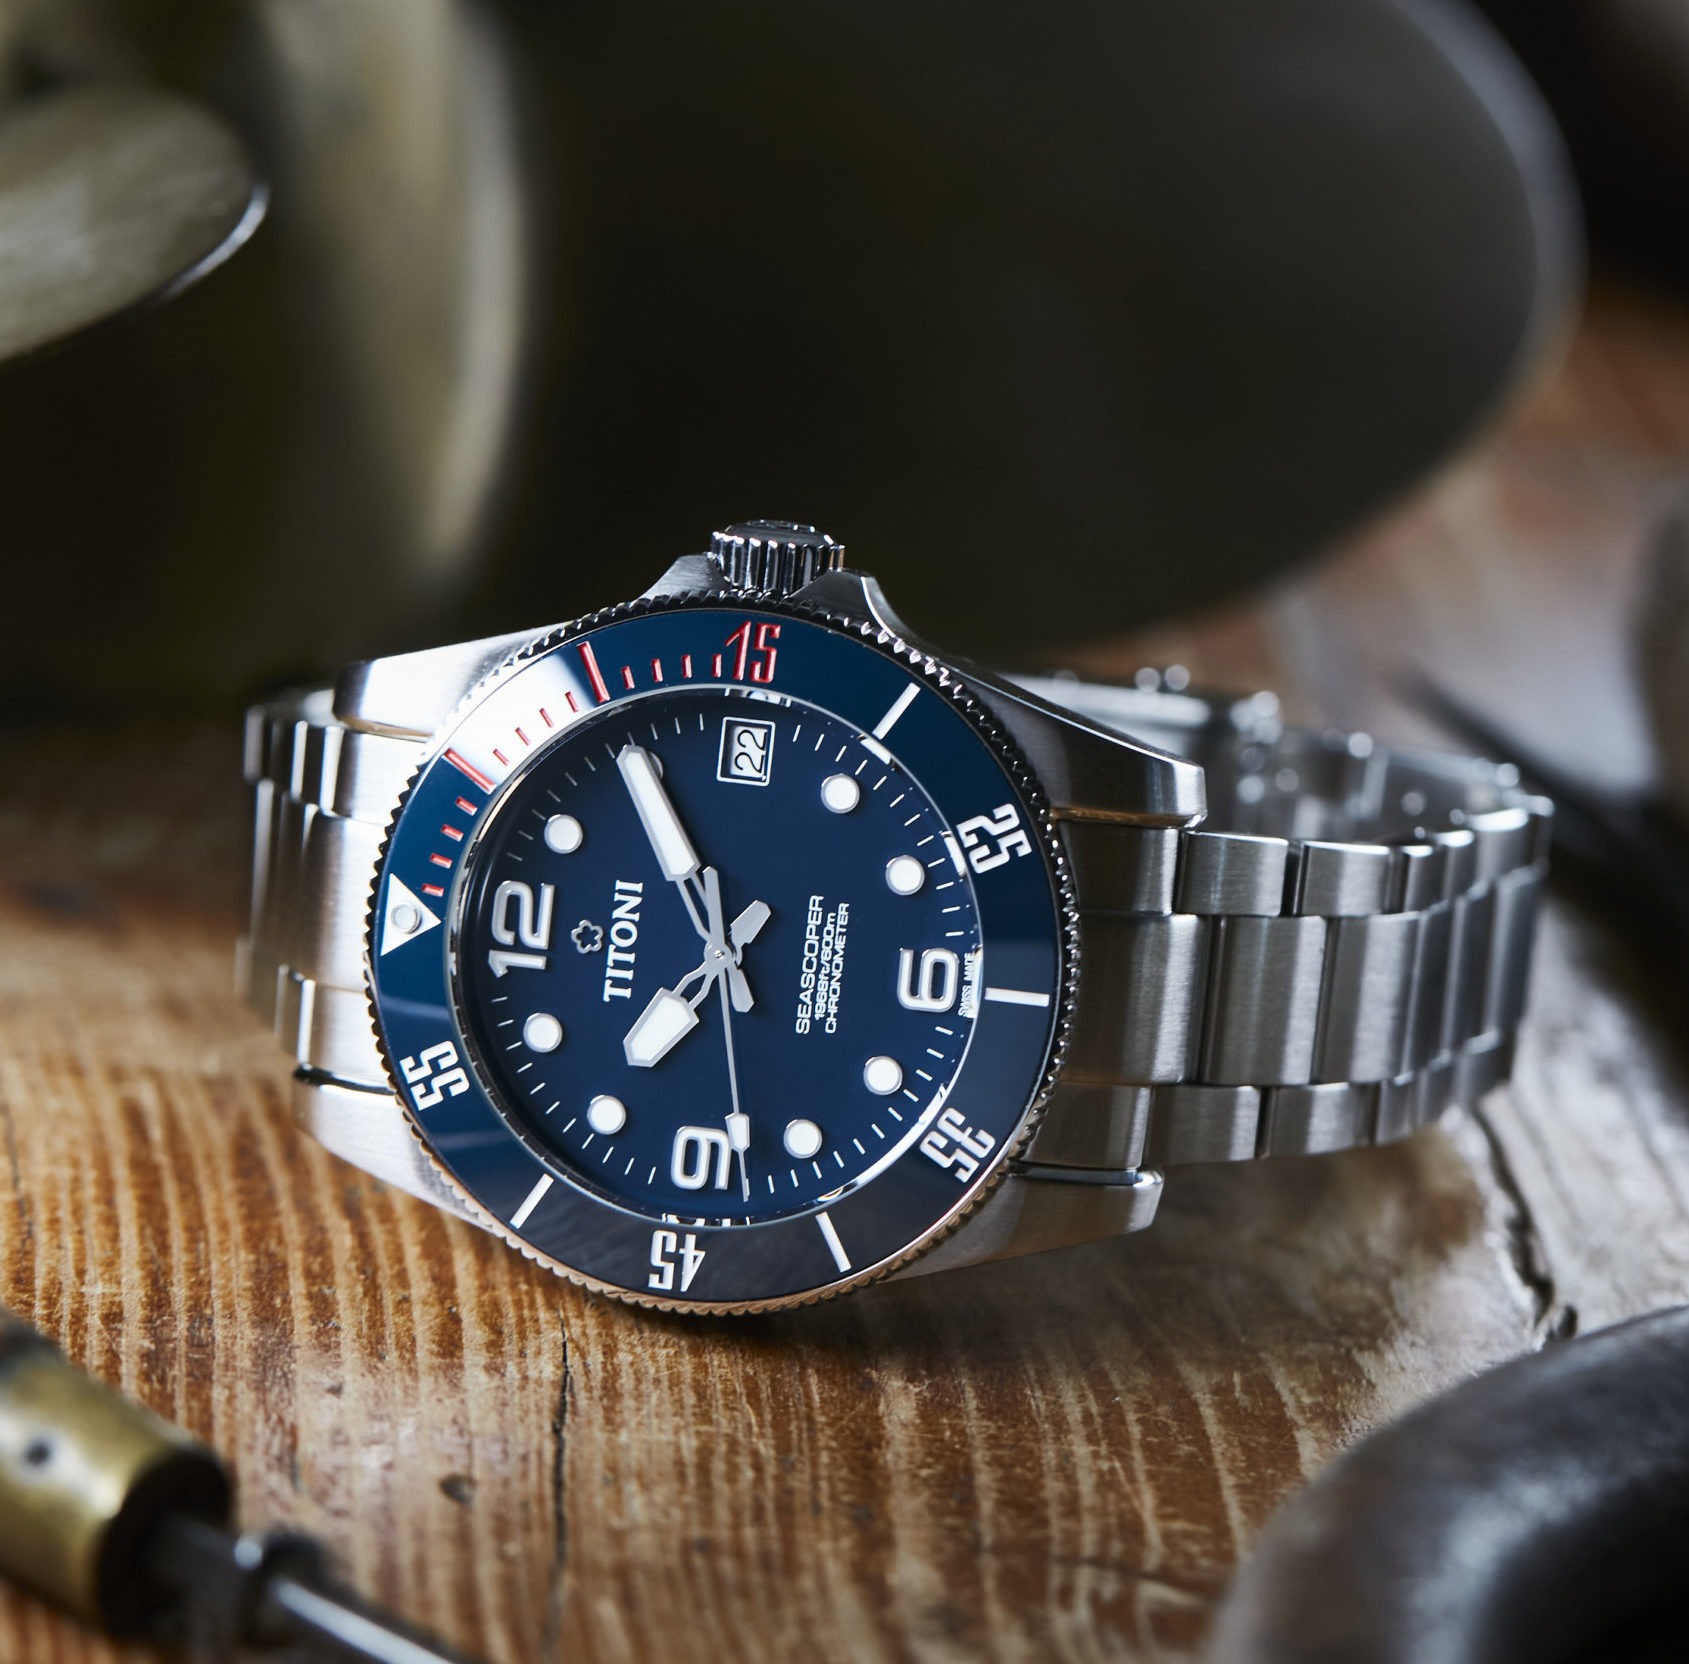 IN-DEPTH: The Titoni Seascoper 600 is a dive watch from a brand you should know more about